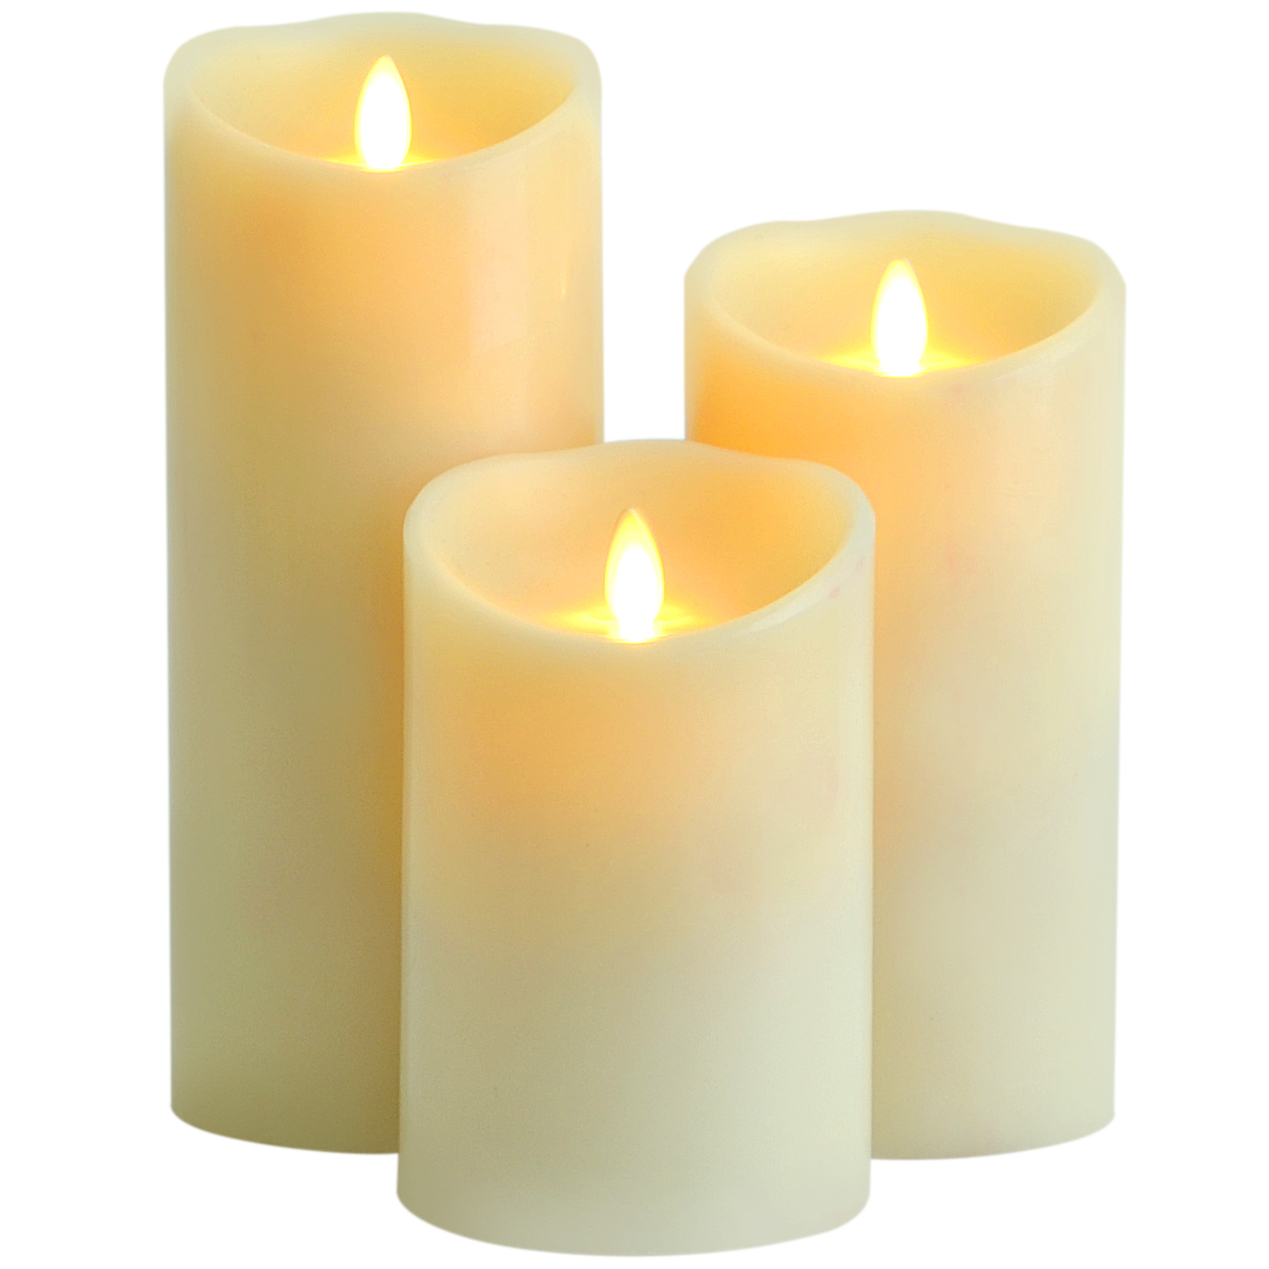 Moving wick led flameless pillar candles set of 3